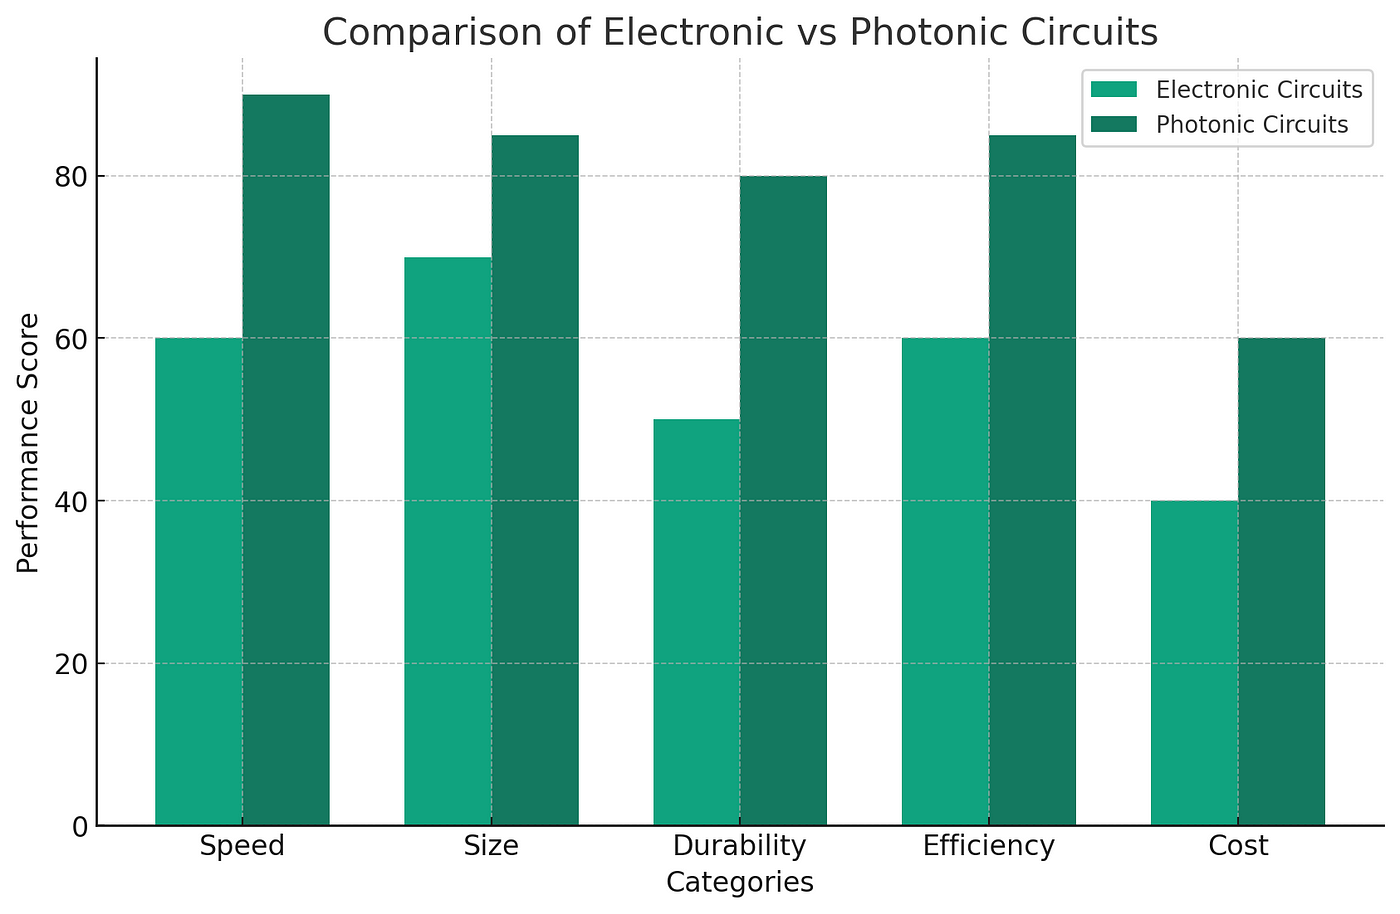 Bar graph comparing electronic circuits and photonic circuits across five categories: Speed, Size, Durability, Efficiency, and Cost. Photonic circuits score higher in all categories, indicating superior performance, particularly in Speed and Durability.